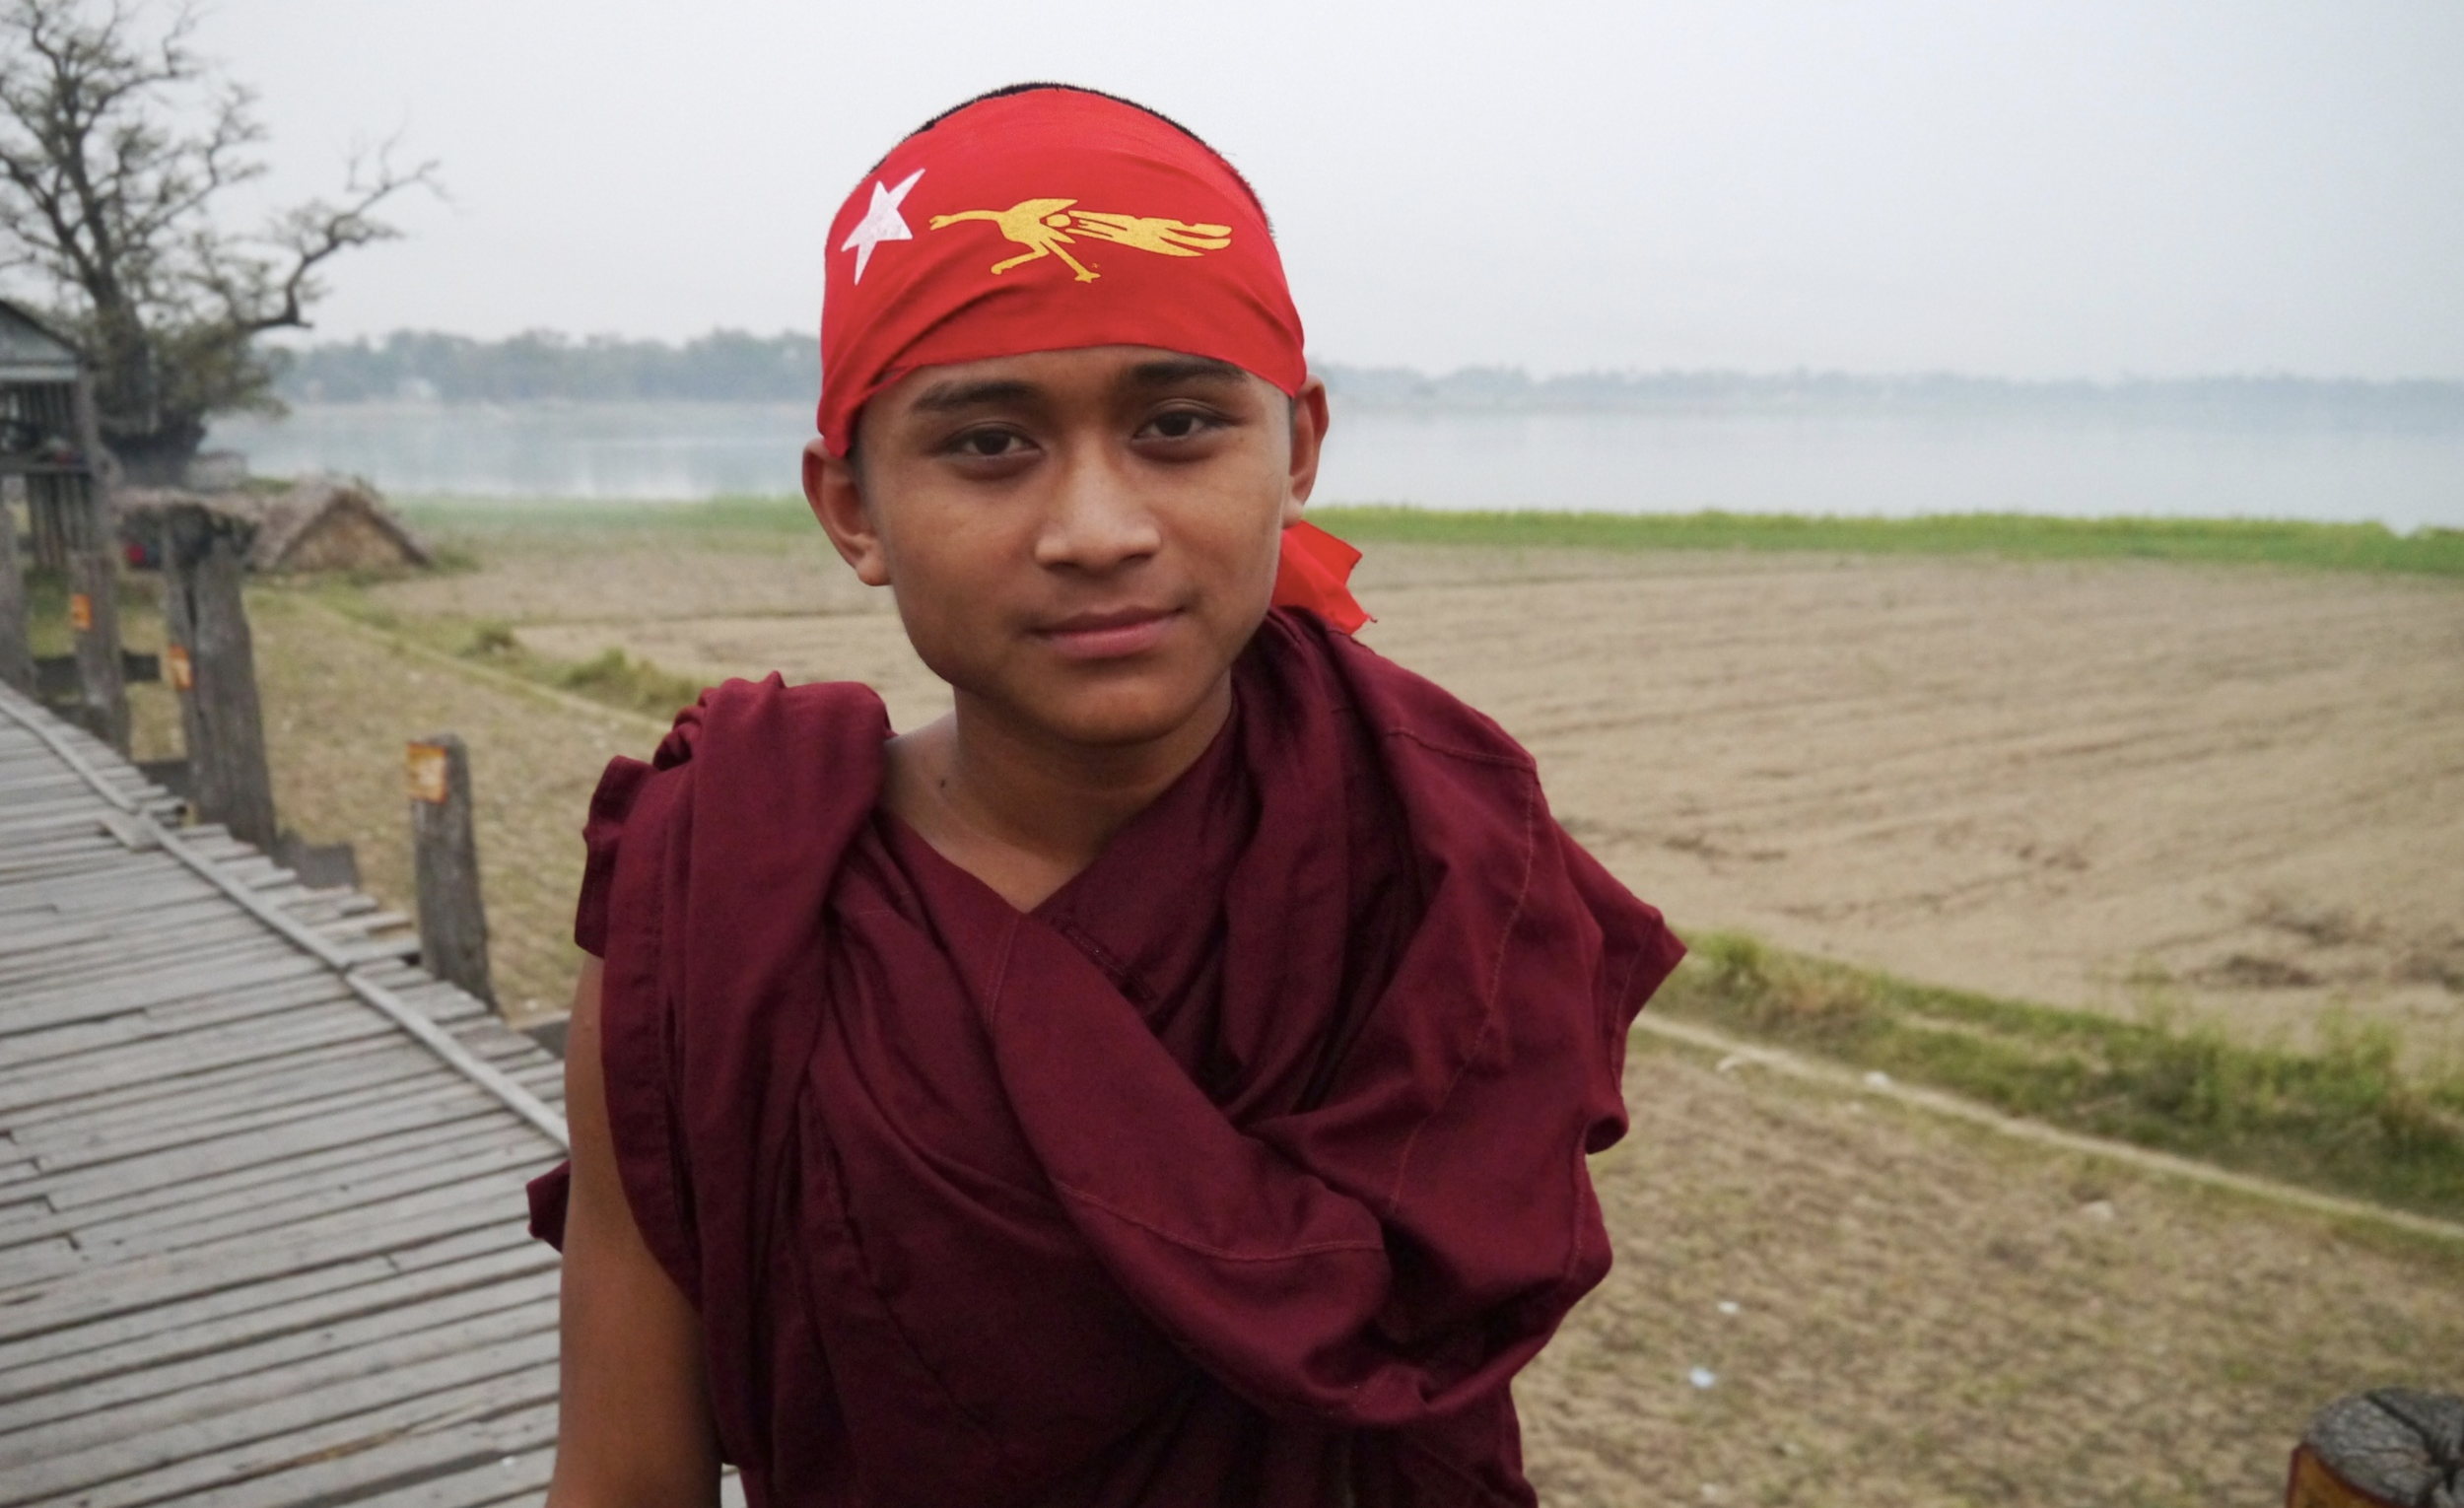  A young monk wears the white star and golden peacock insignia of the NLD. Monks of Burma have been among the staunchest supporters of Suu Kyi, and their “saffron revolution” of 2007 still counts as among the most important protests since the first u